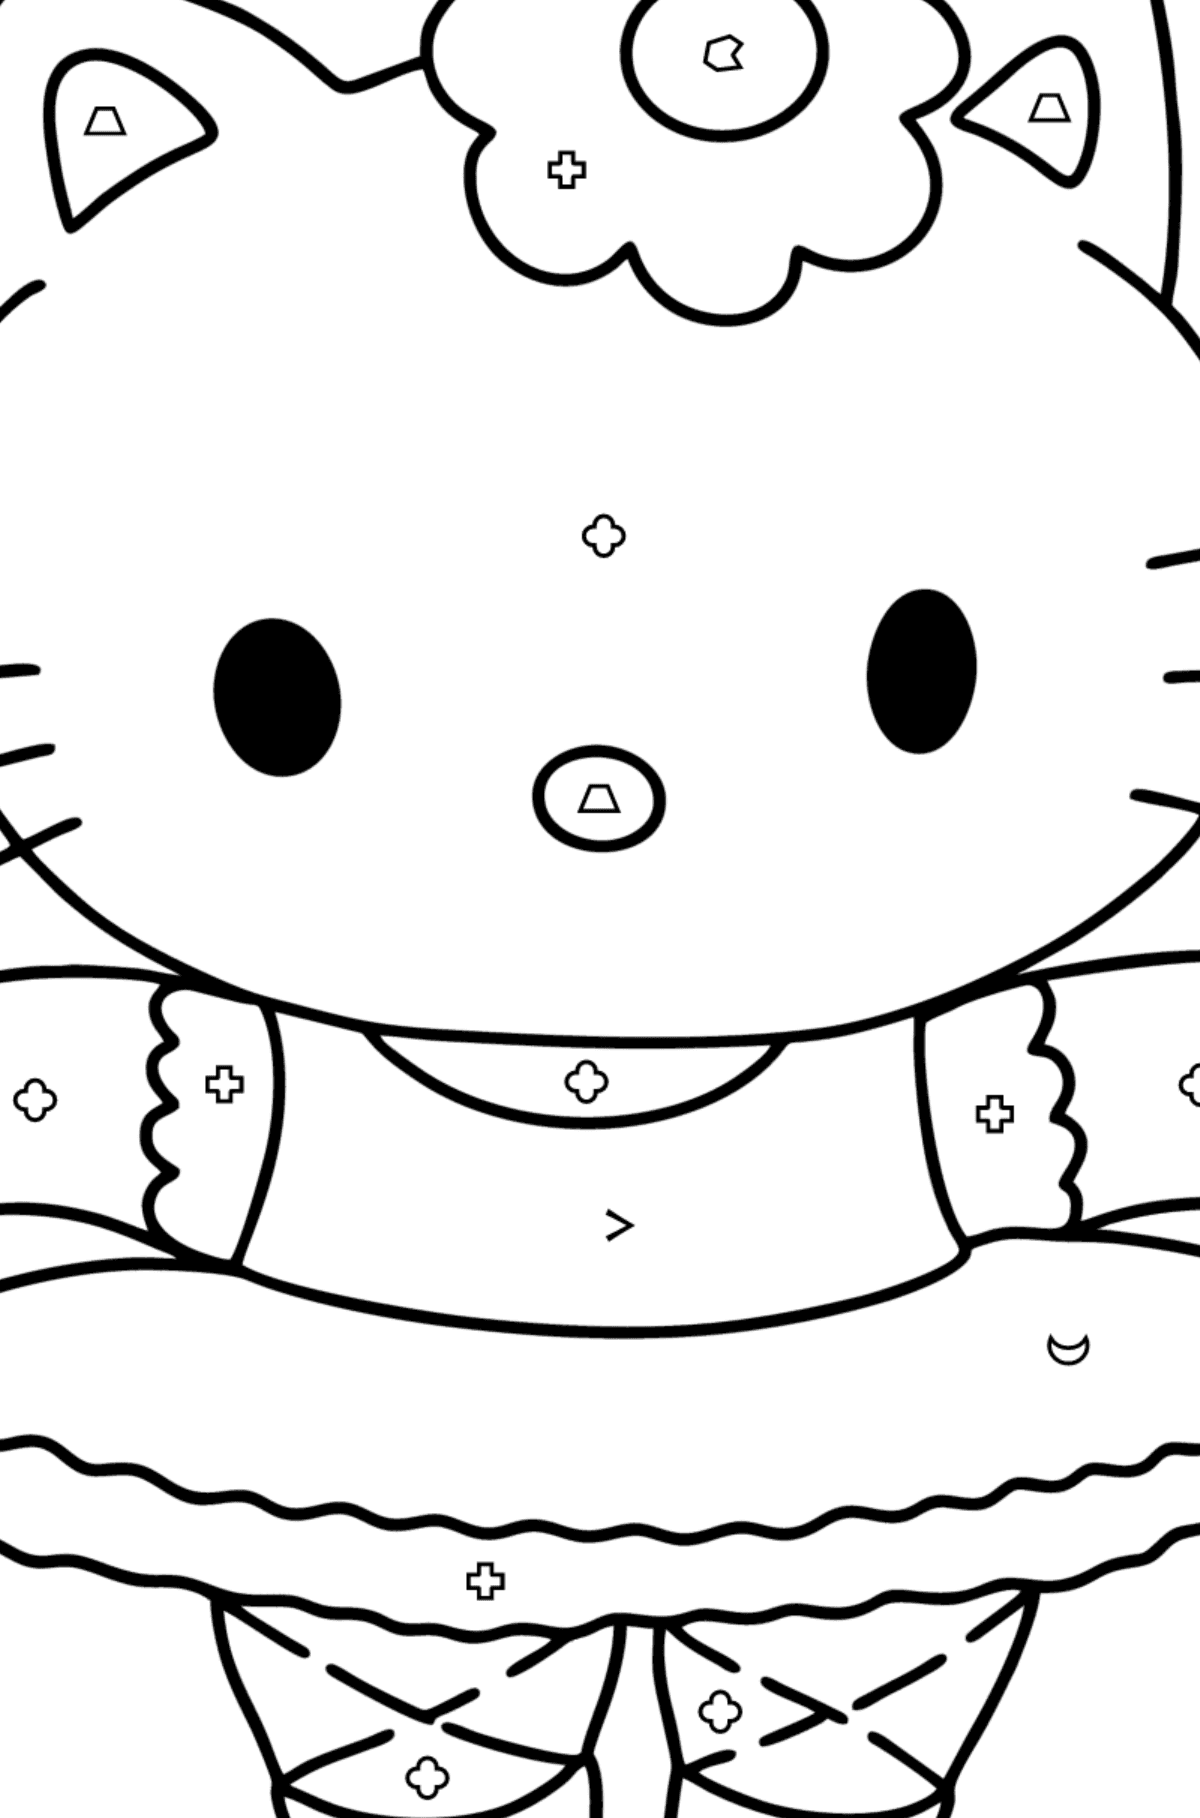 Hello Kitty Ballerina coloring page - Coloring by Symbols and Geometric Shapes for Kids